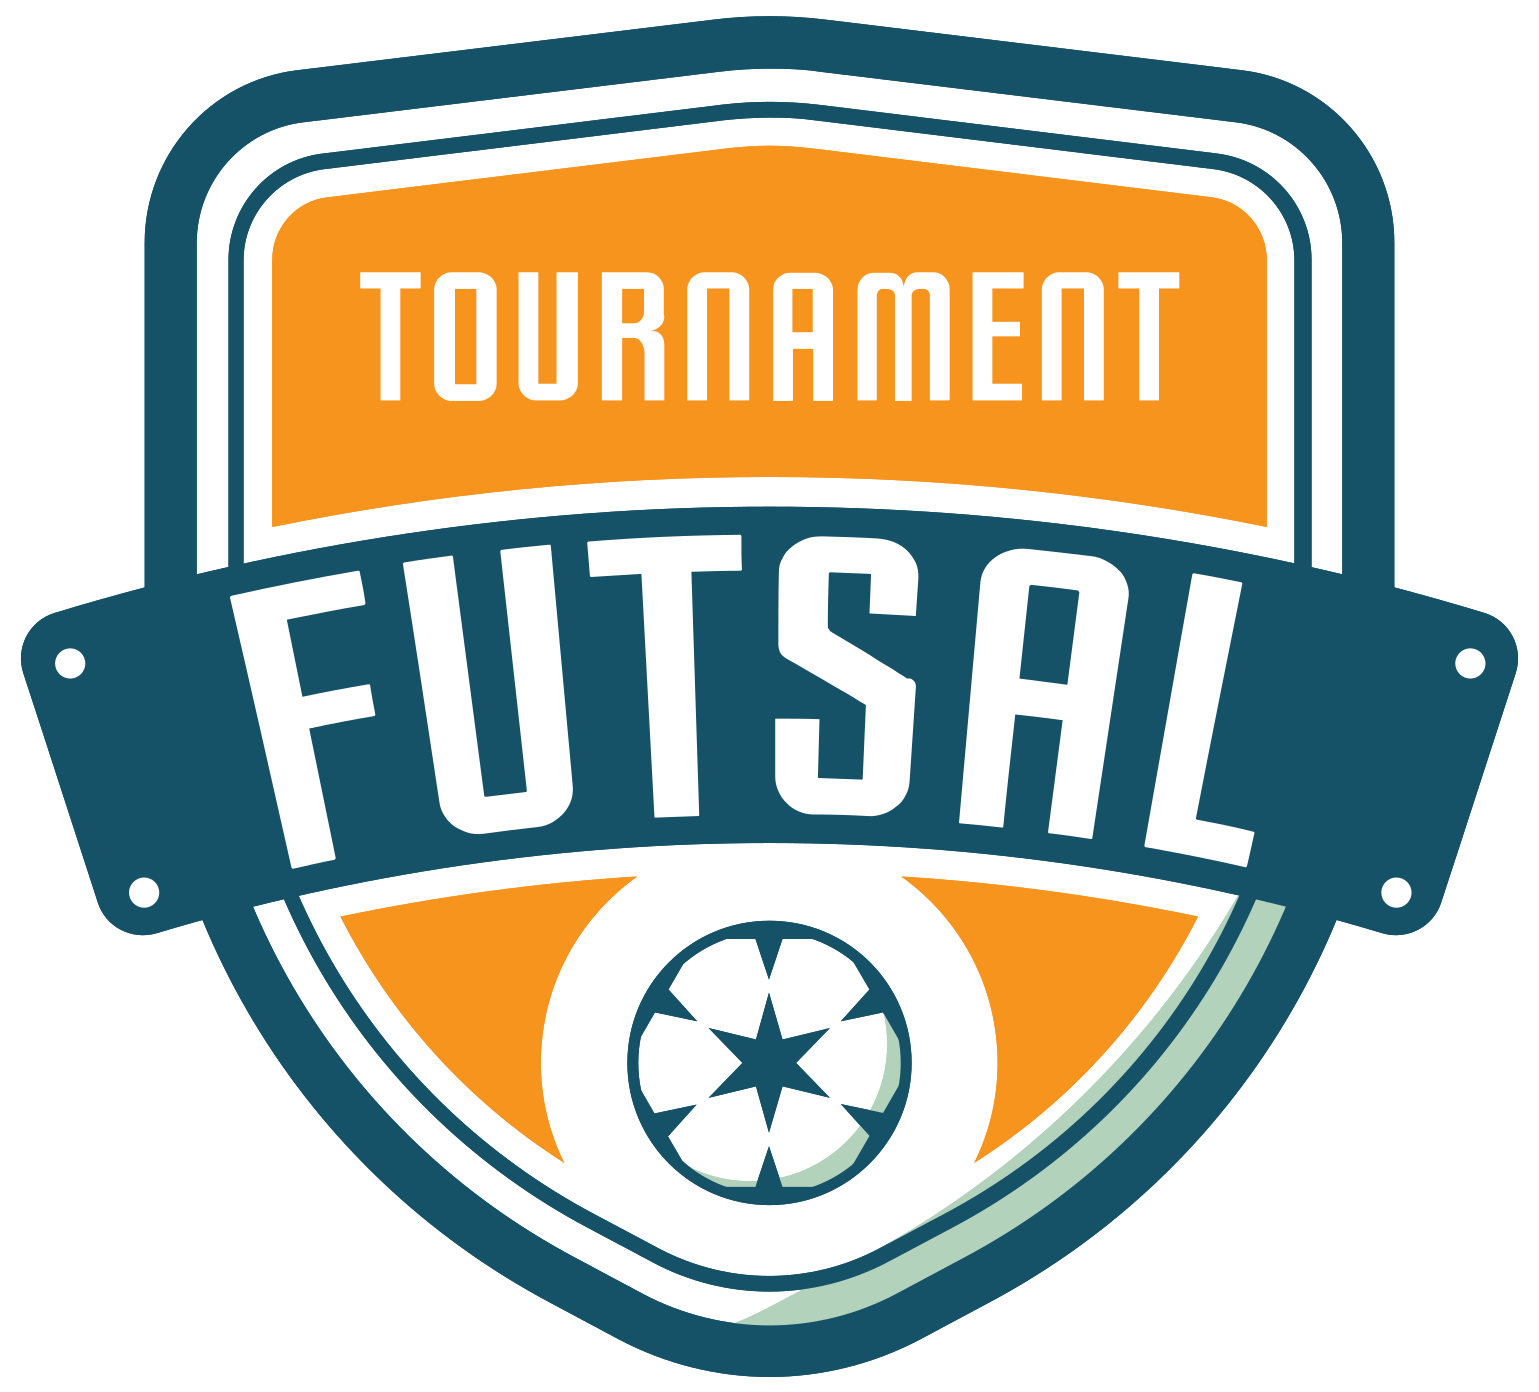 Free Futsal crest 1204243 PNG with Transparent Background